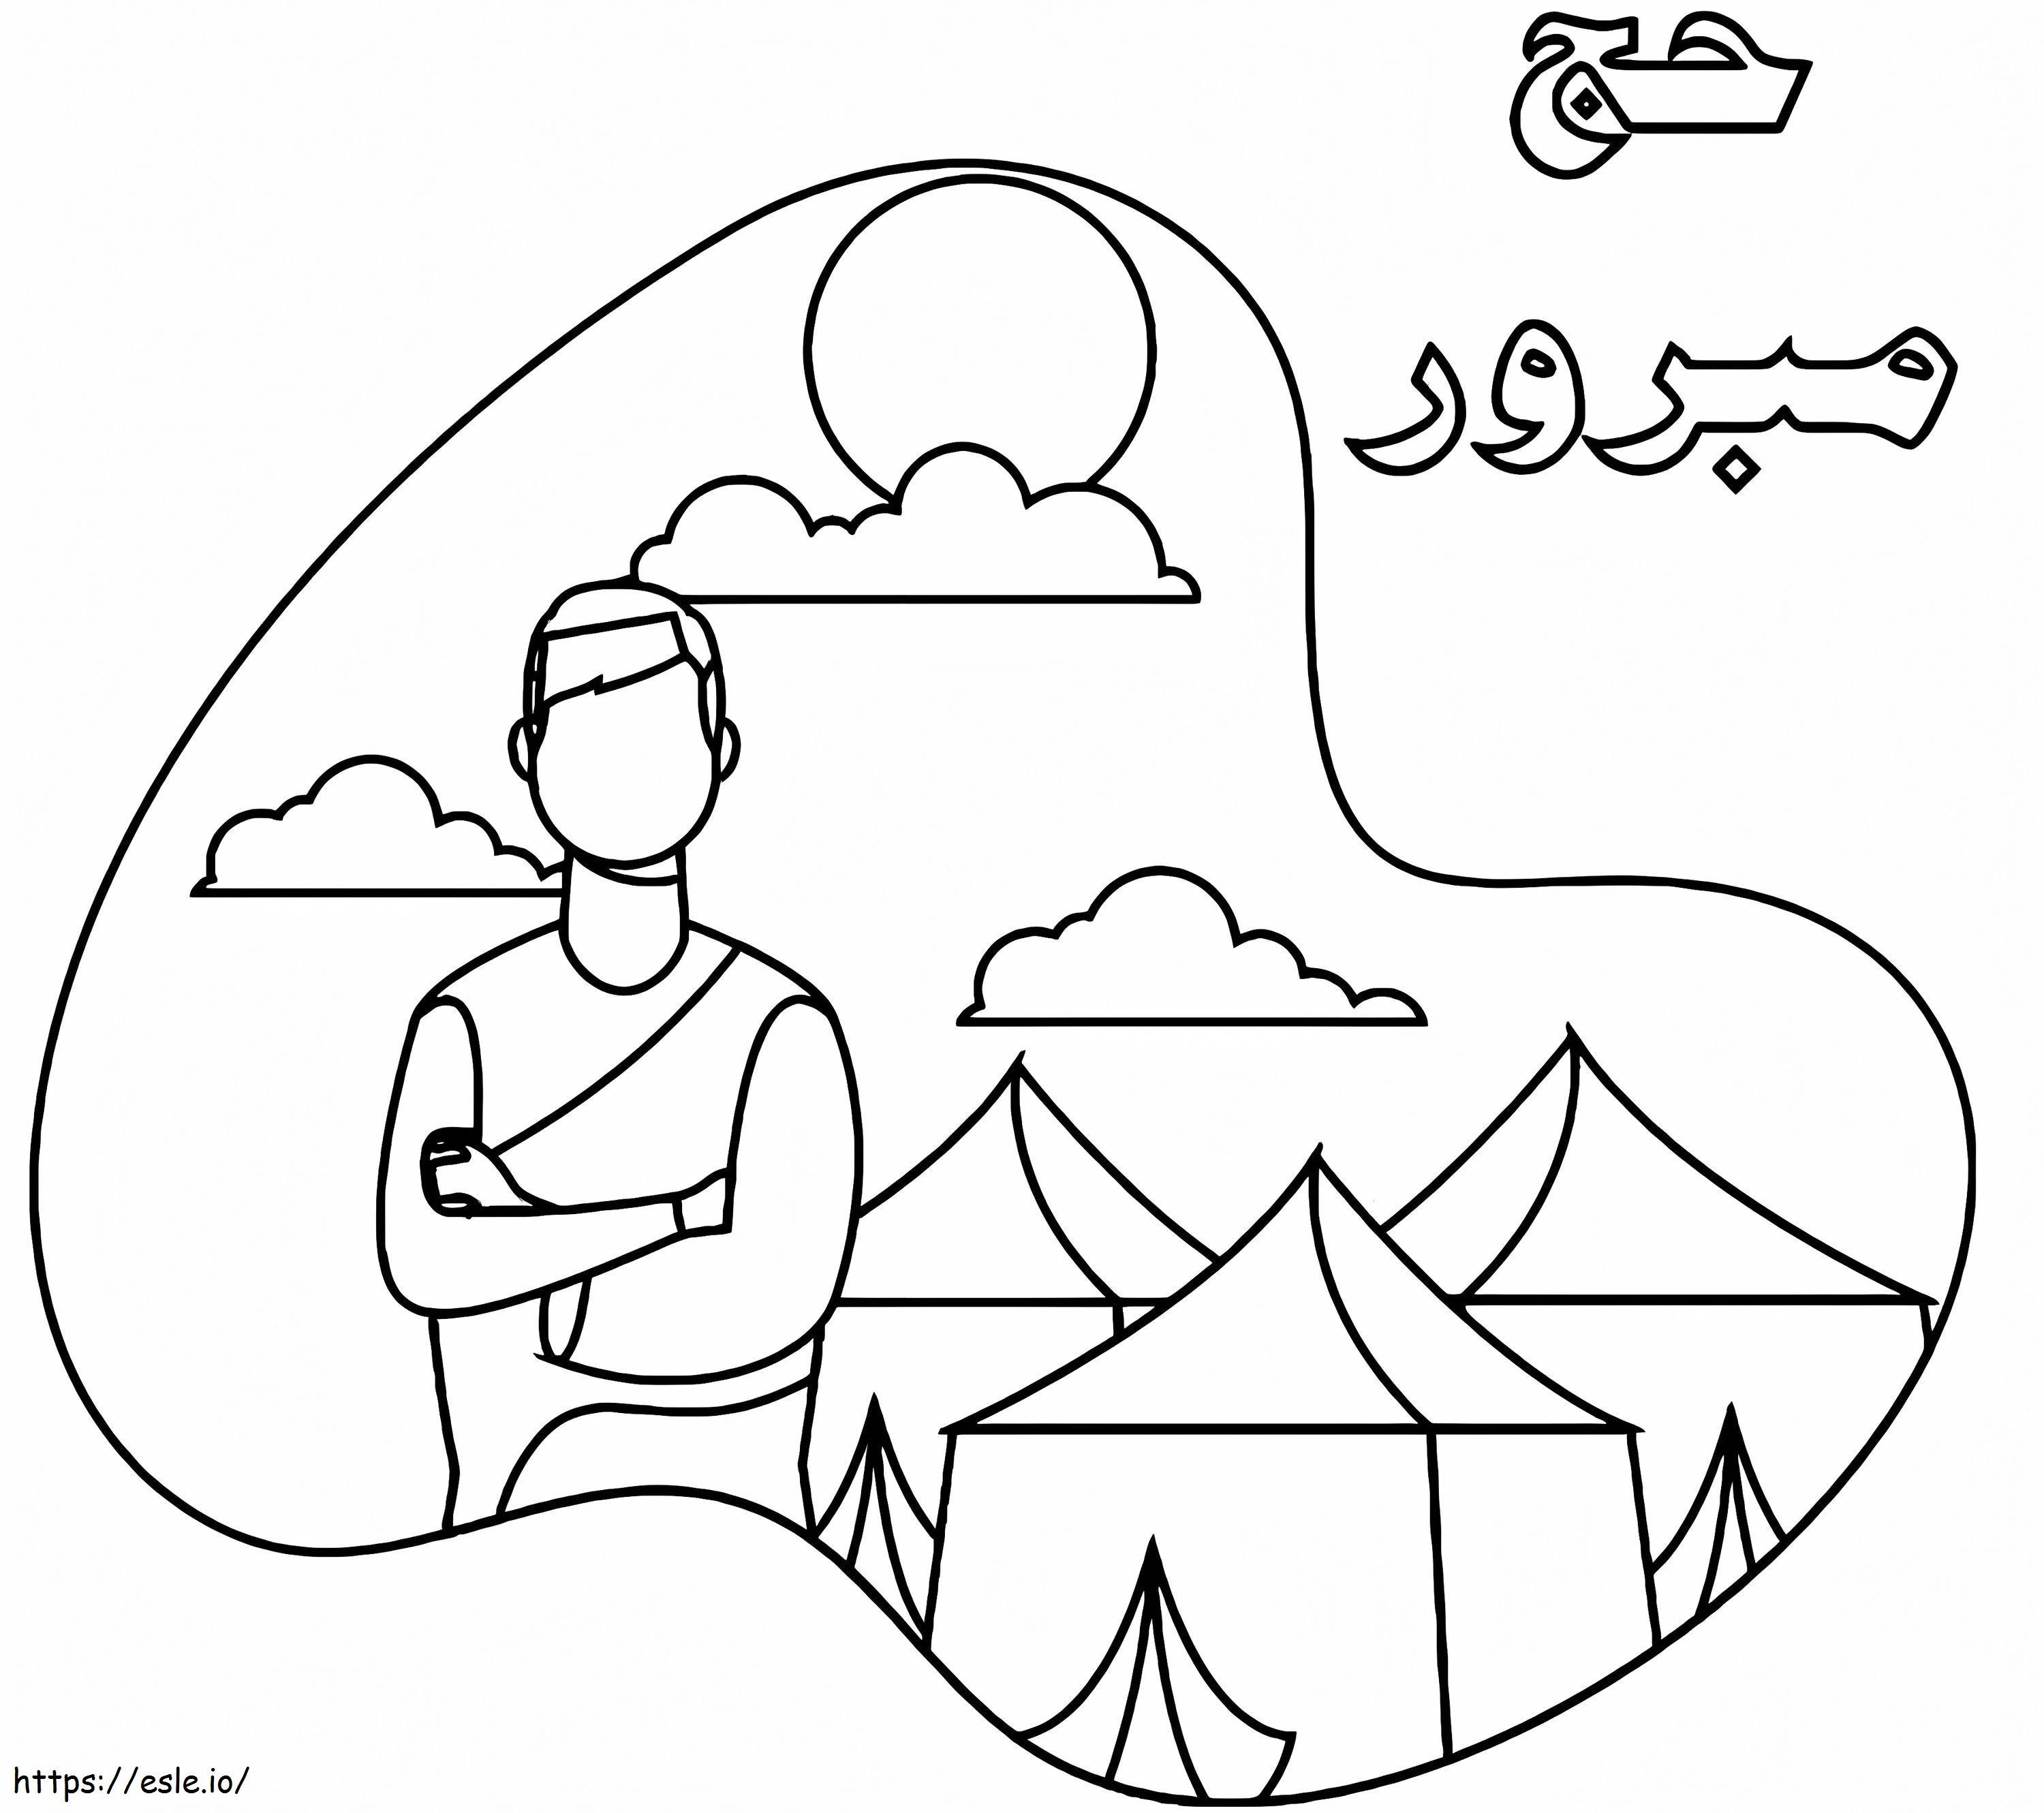 Islamic coloring page